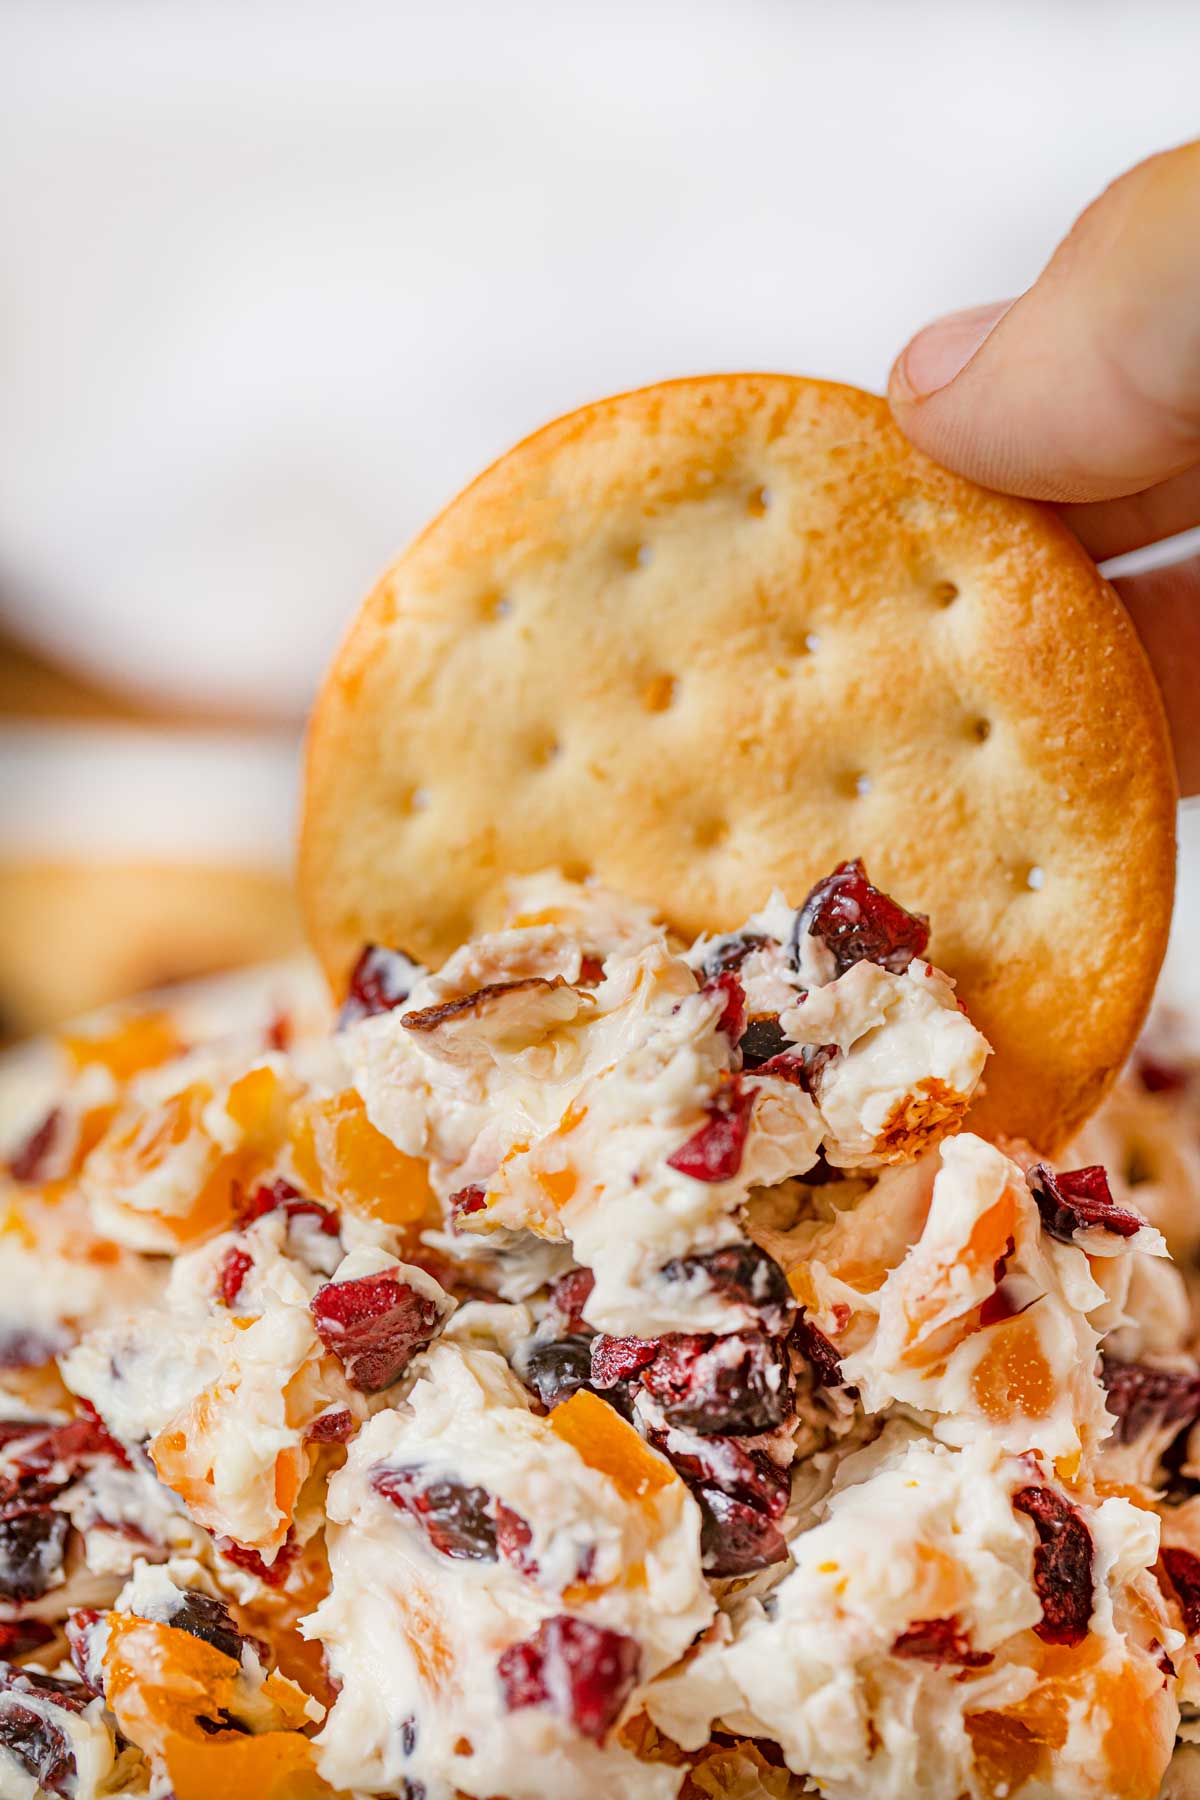 Cracker dipped in Cranberry Cream Cheese Dip